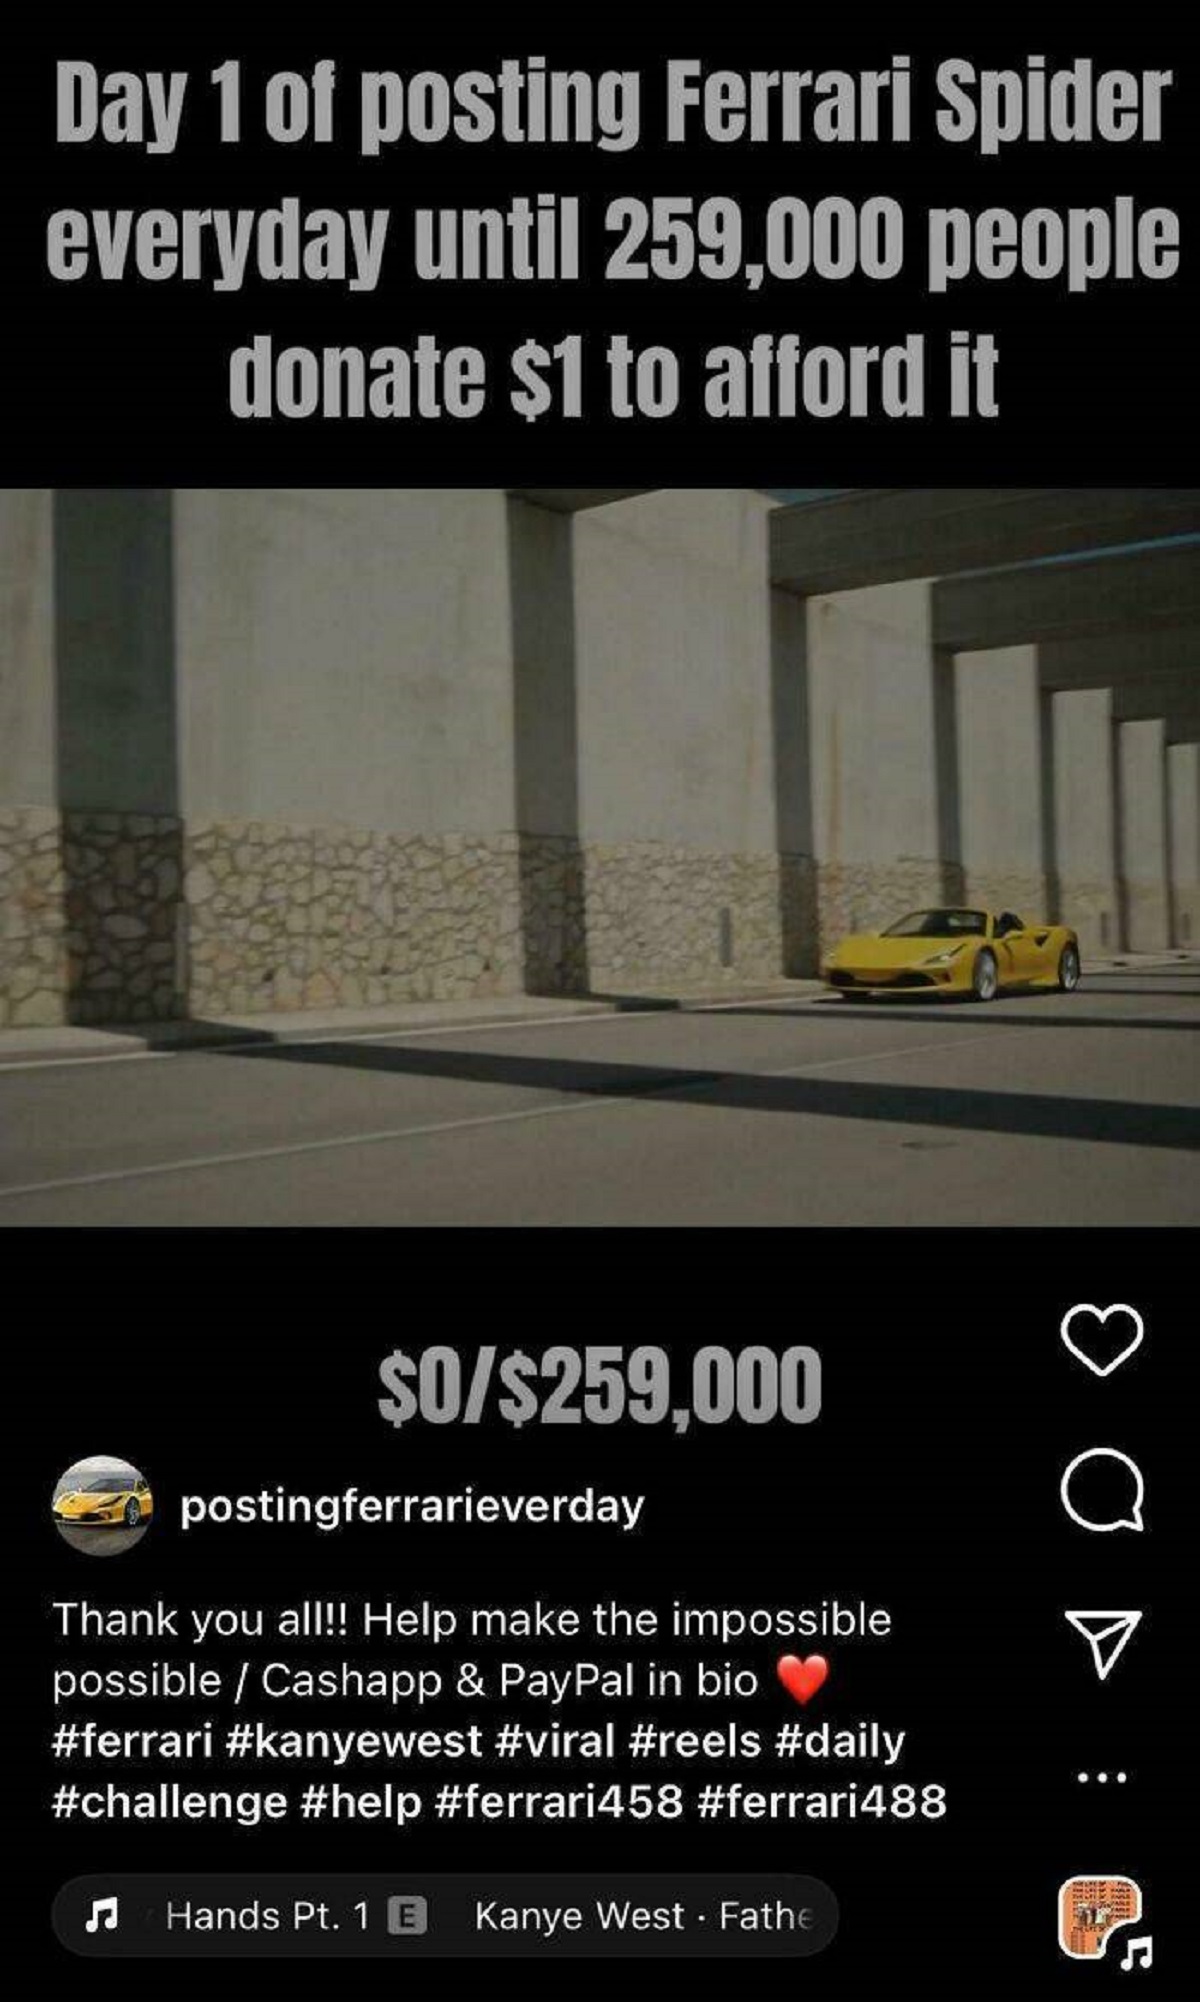 screenshot - Day 1 of posting Ferrari Spider everyday until 259,000 people donate $1 to afford it $0$259,000 postingferrarieverday Thank you all!! Help make the impossible possible Cashapp & PayPal in bio Hands Pt. 1 E Kanye West Fathe Q